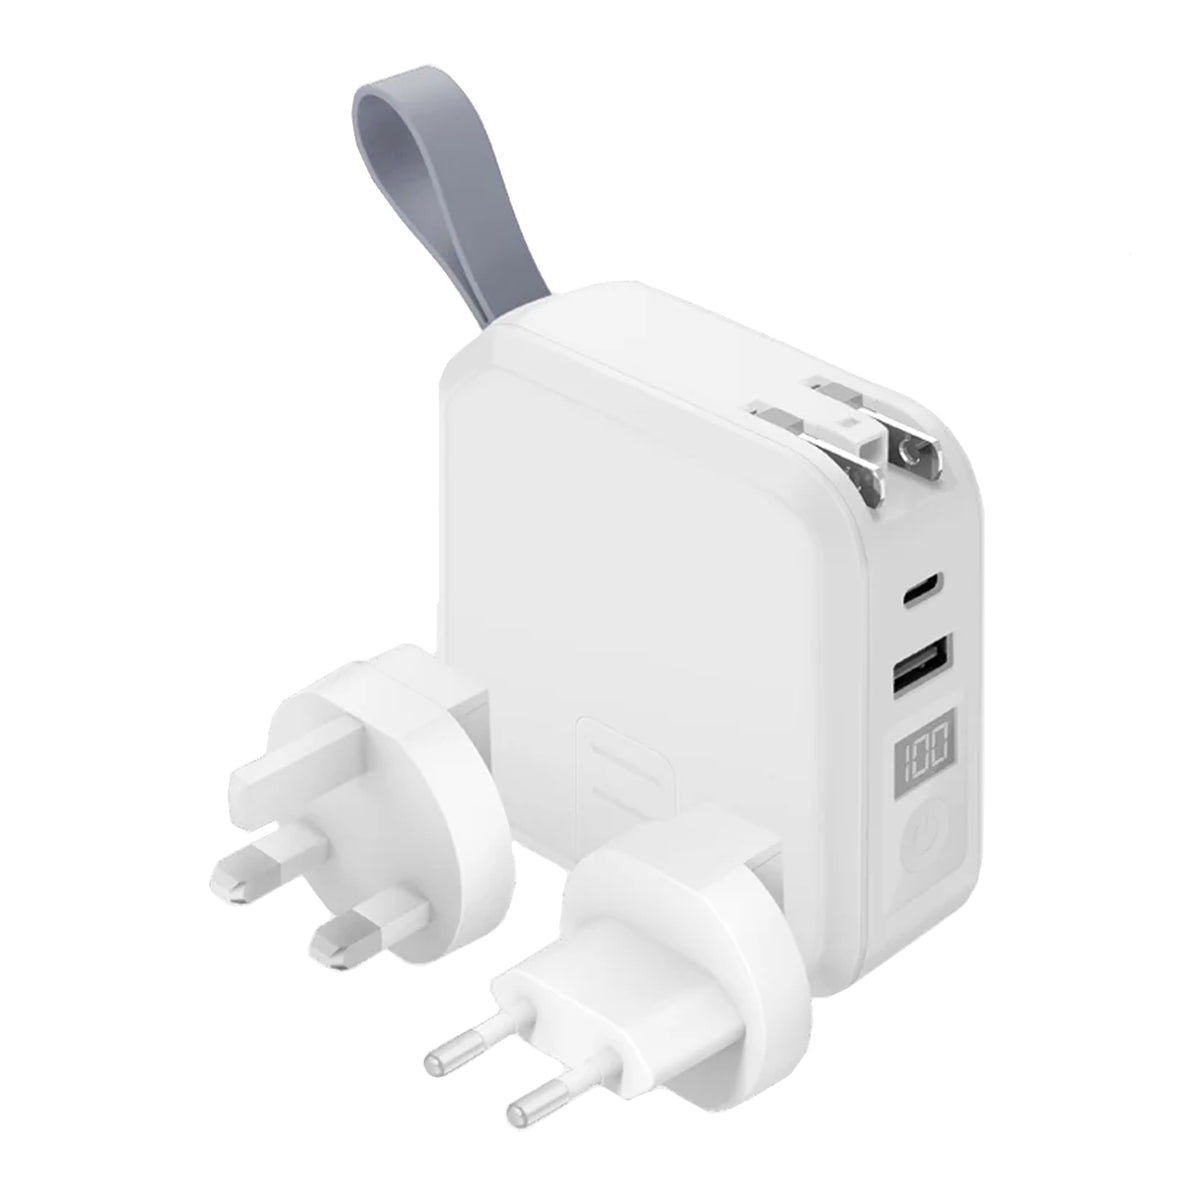 Bazic by Energea GoPort Travel 2-In-1 Travel Adapter + 10,000mAh Powerbank with Wireless Charging